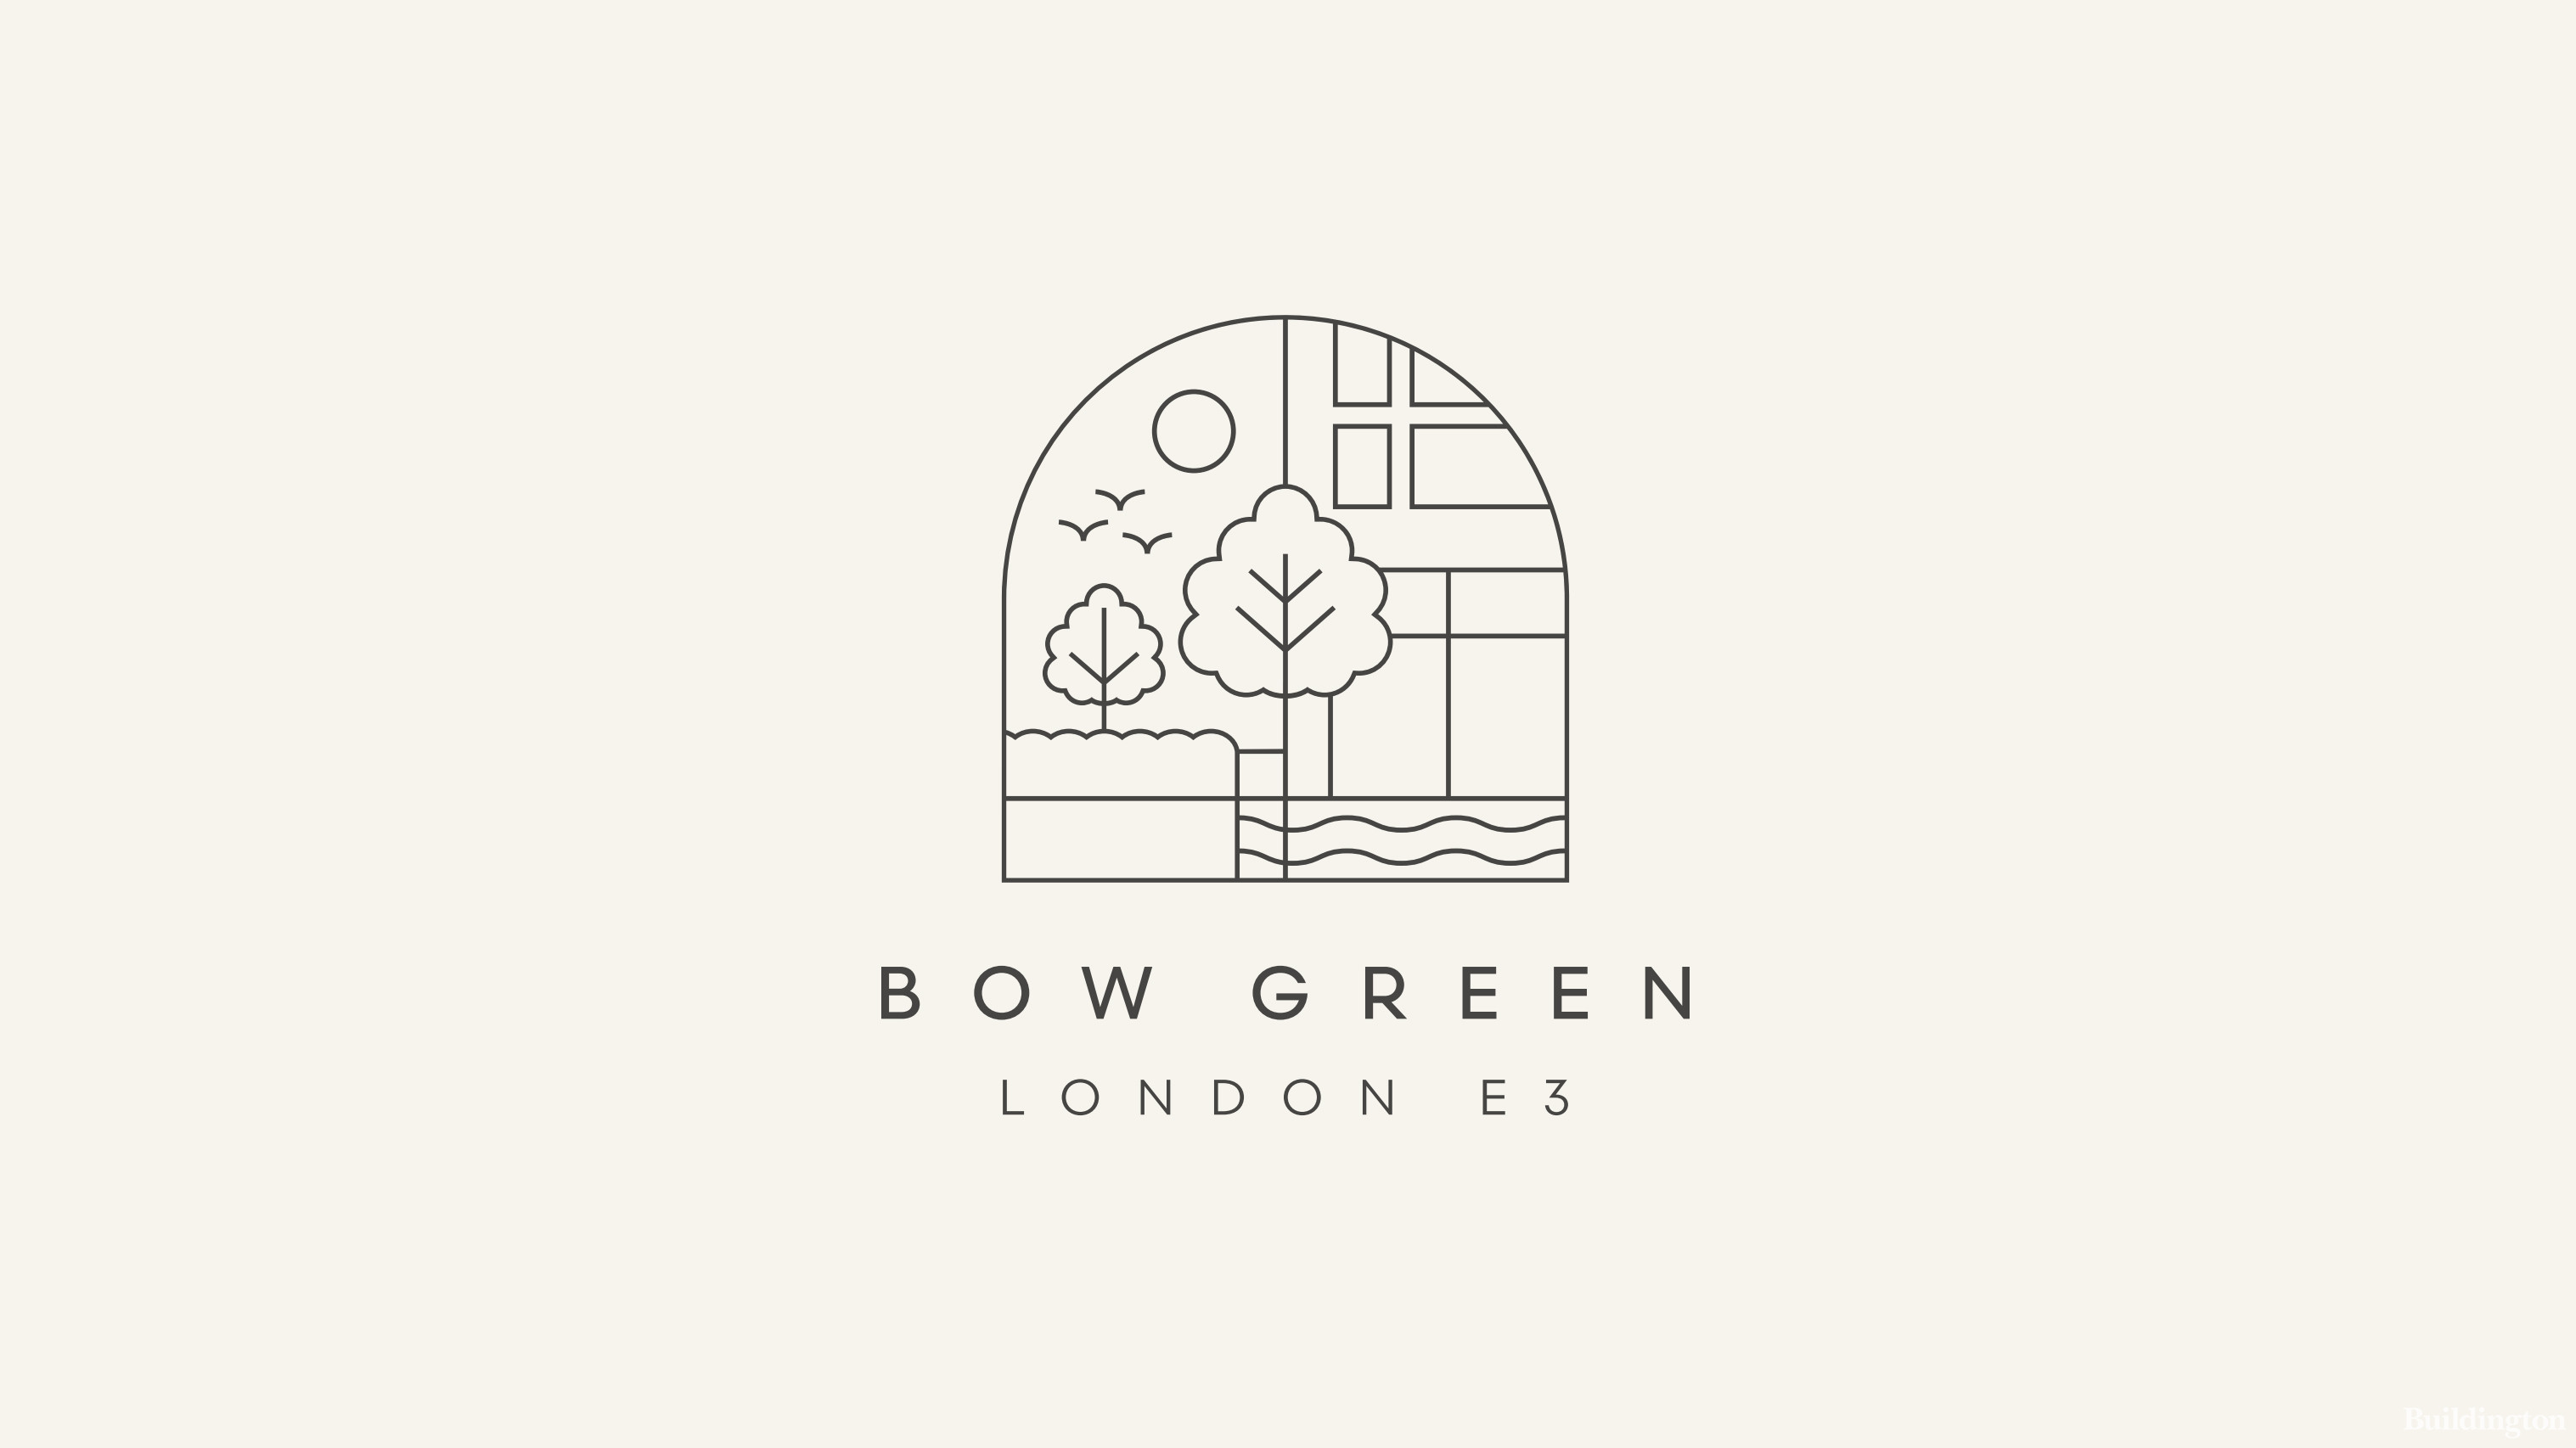 Logo of Bow Green development of new homes by St James Bow Common, London E3